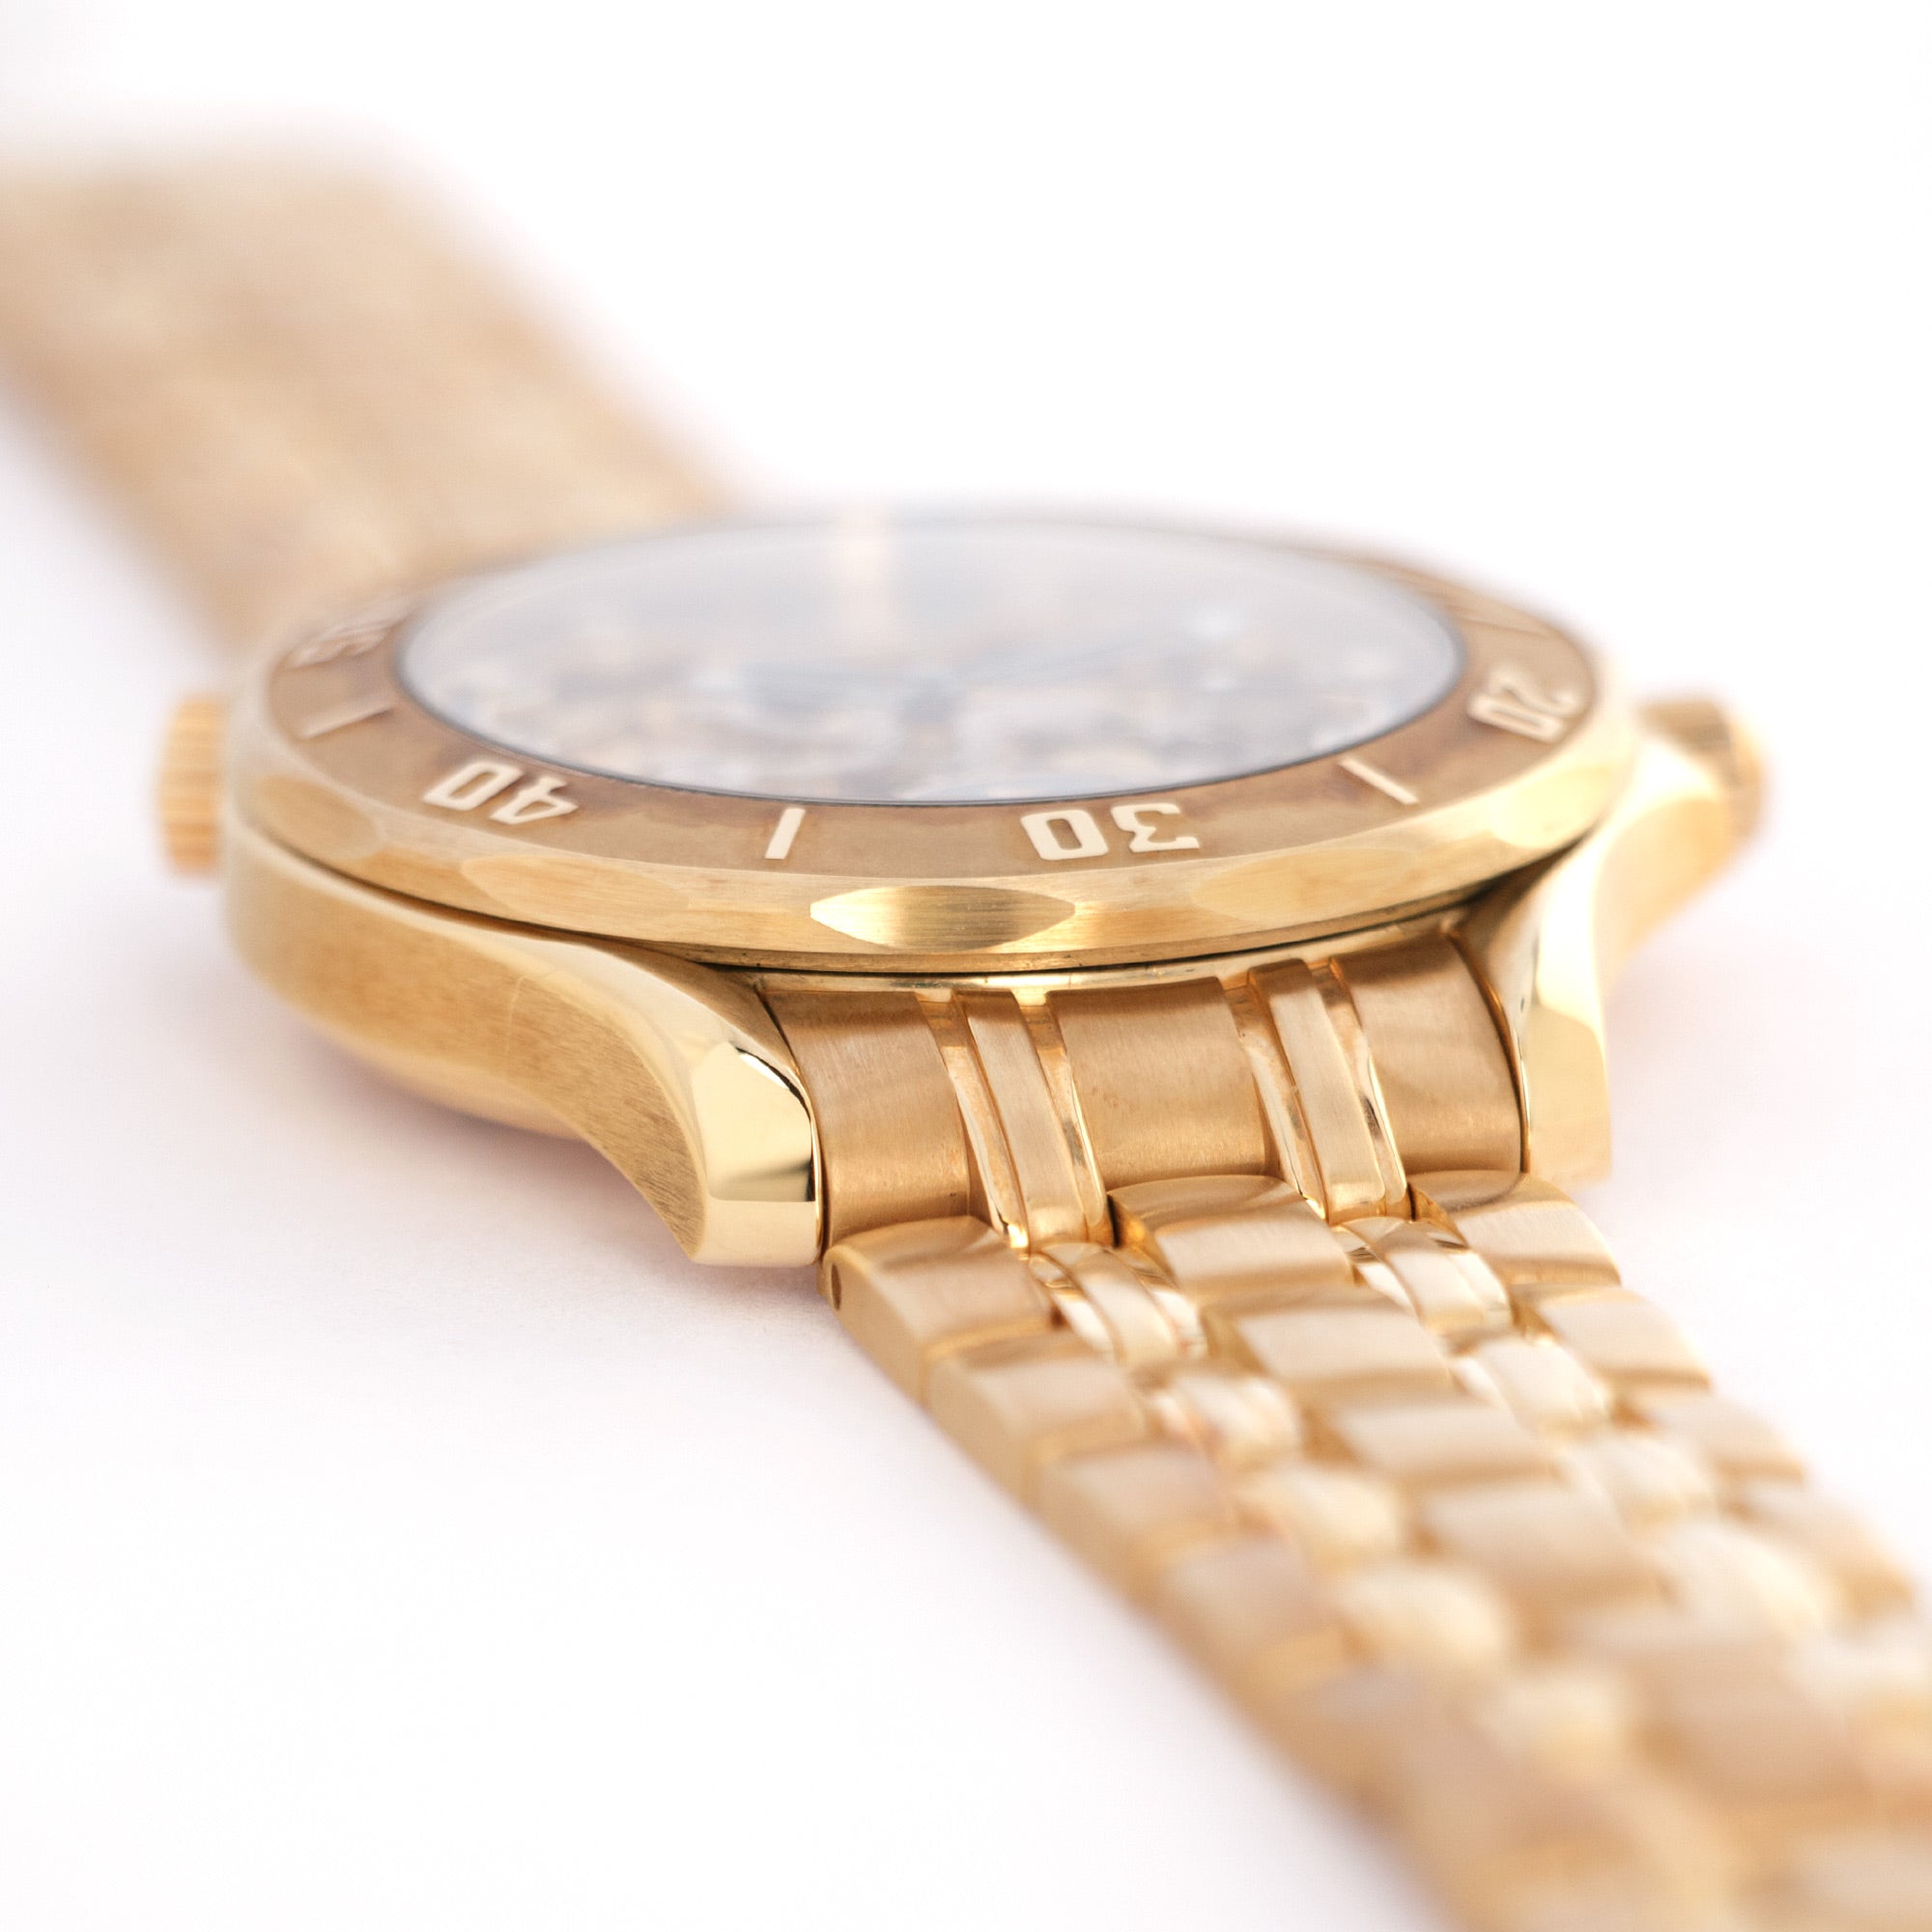 Omega - Omega Yellow Gold Seamaster Skeleton 50th Anniversary Watch - The Keystone Watches